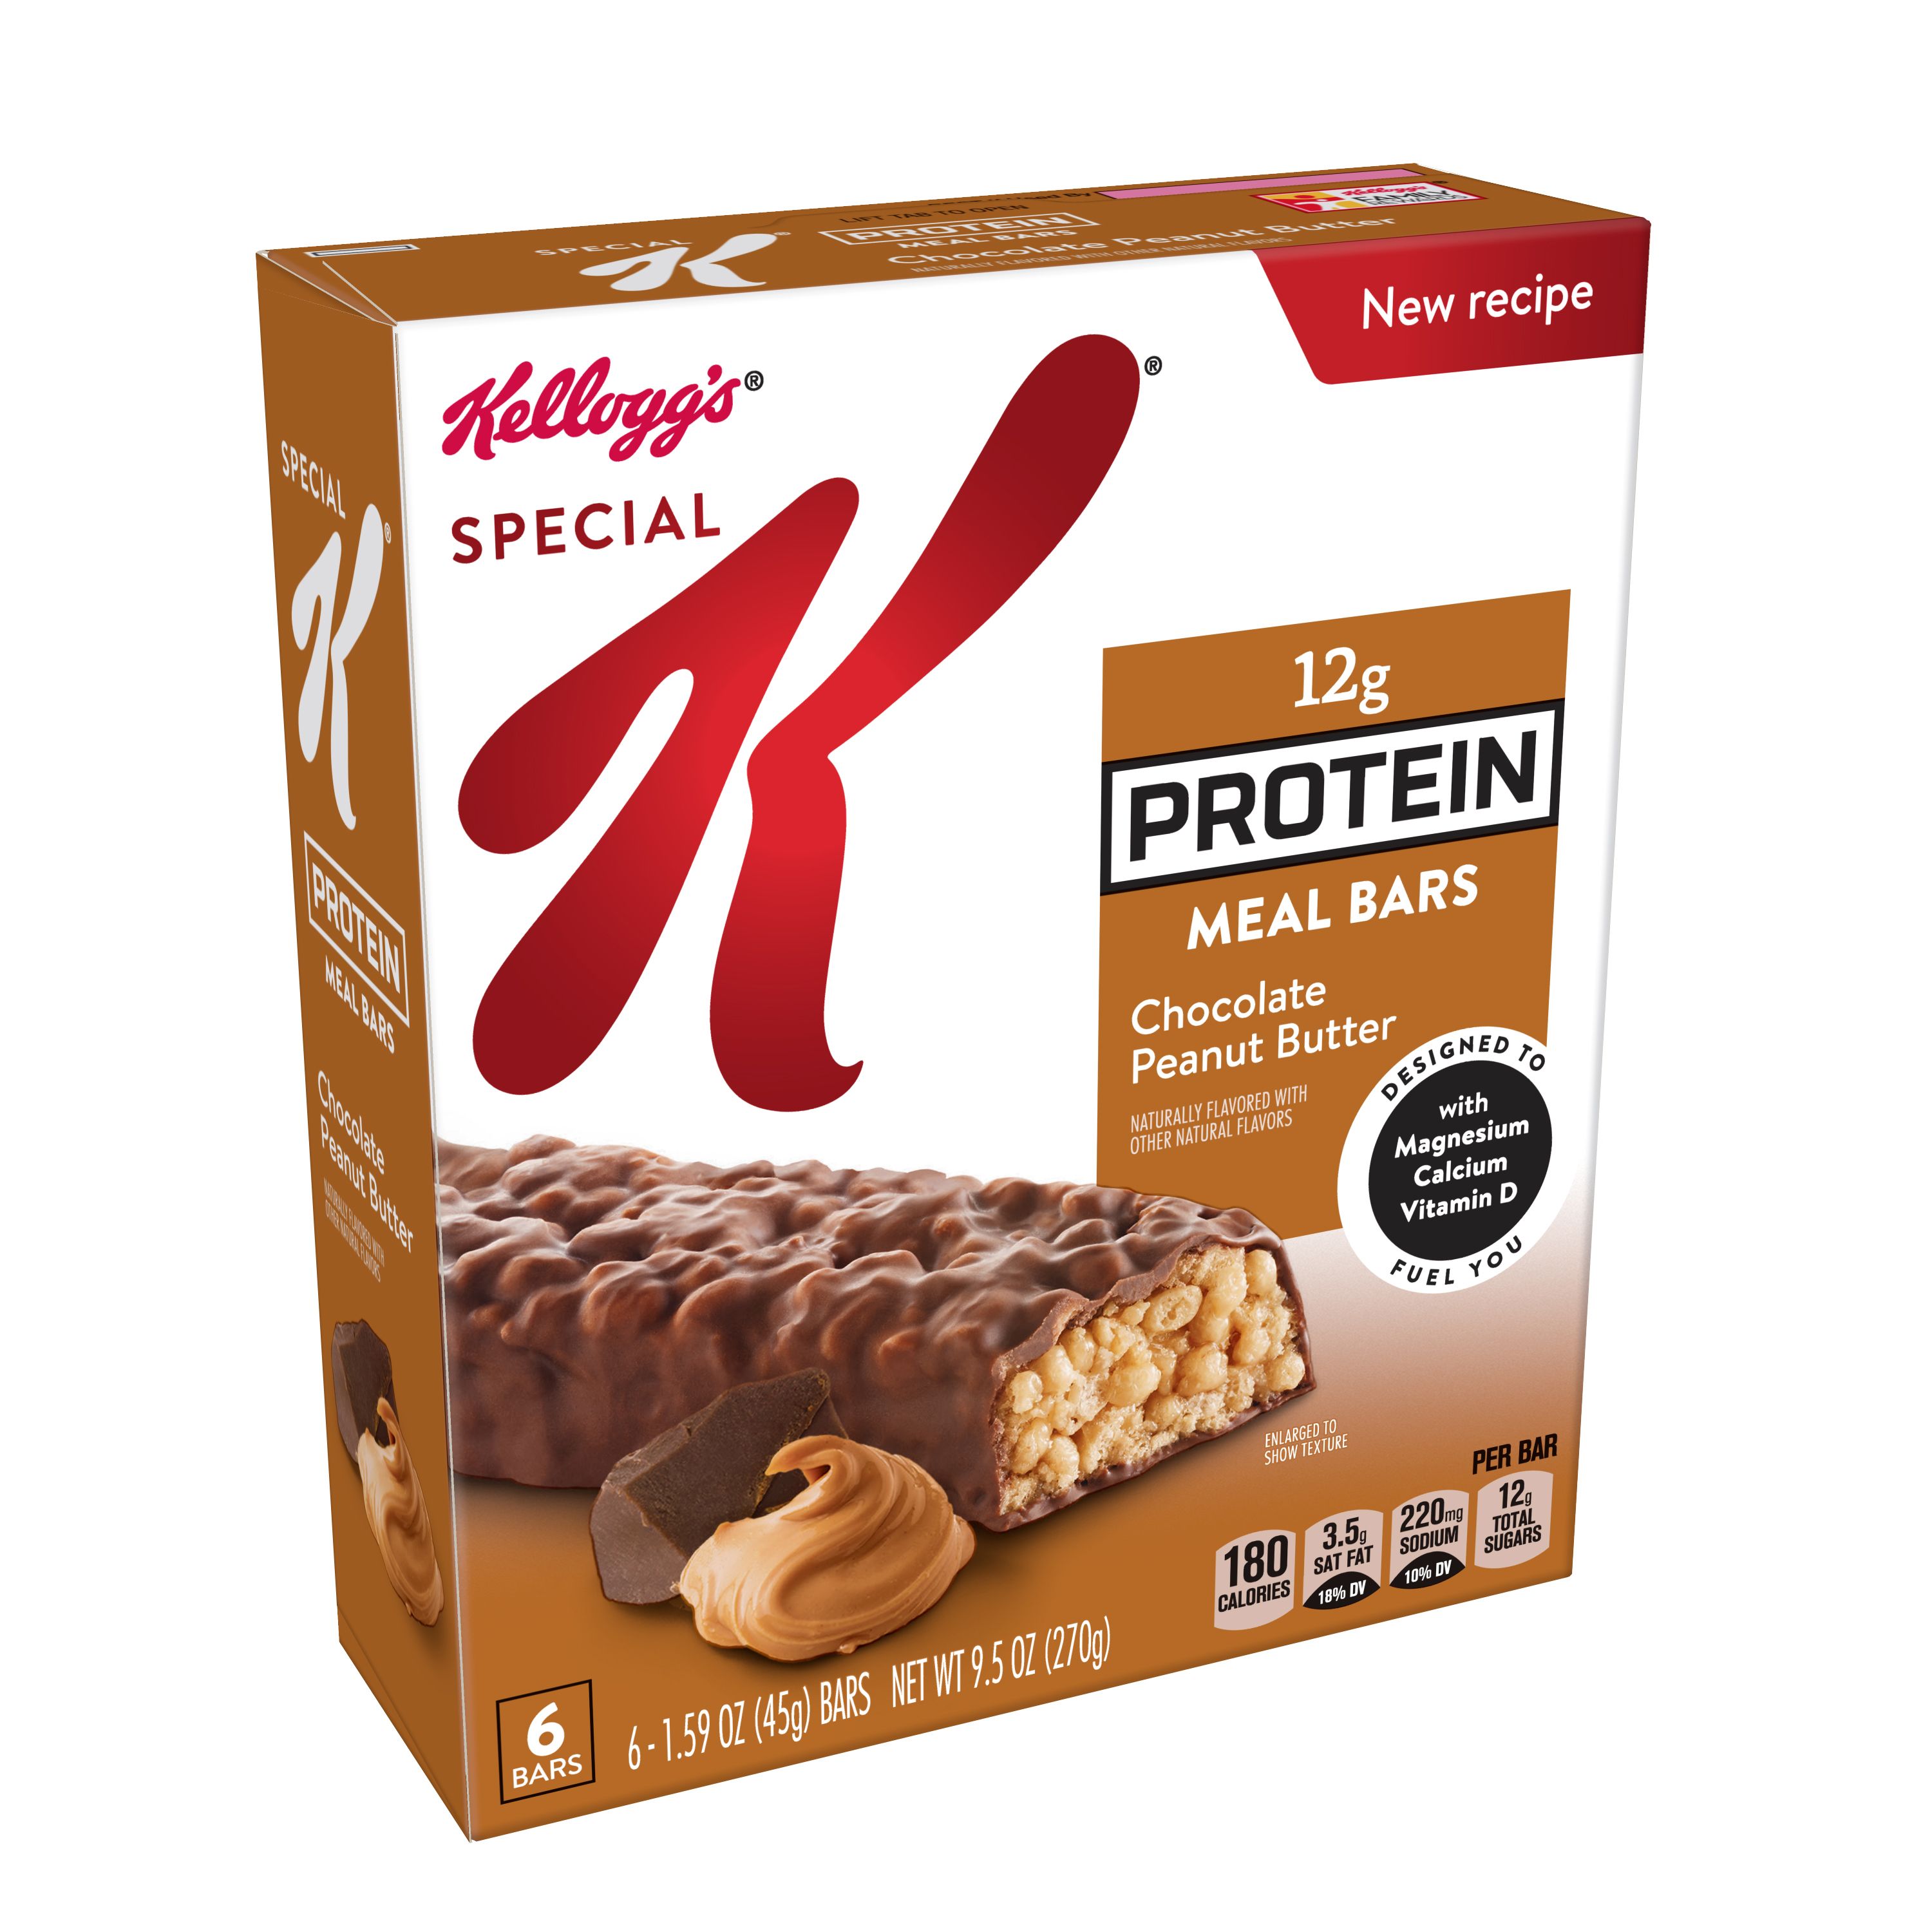 Kellogg's® Special K® Chocolate Peanut Butter Protein Meal Bars